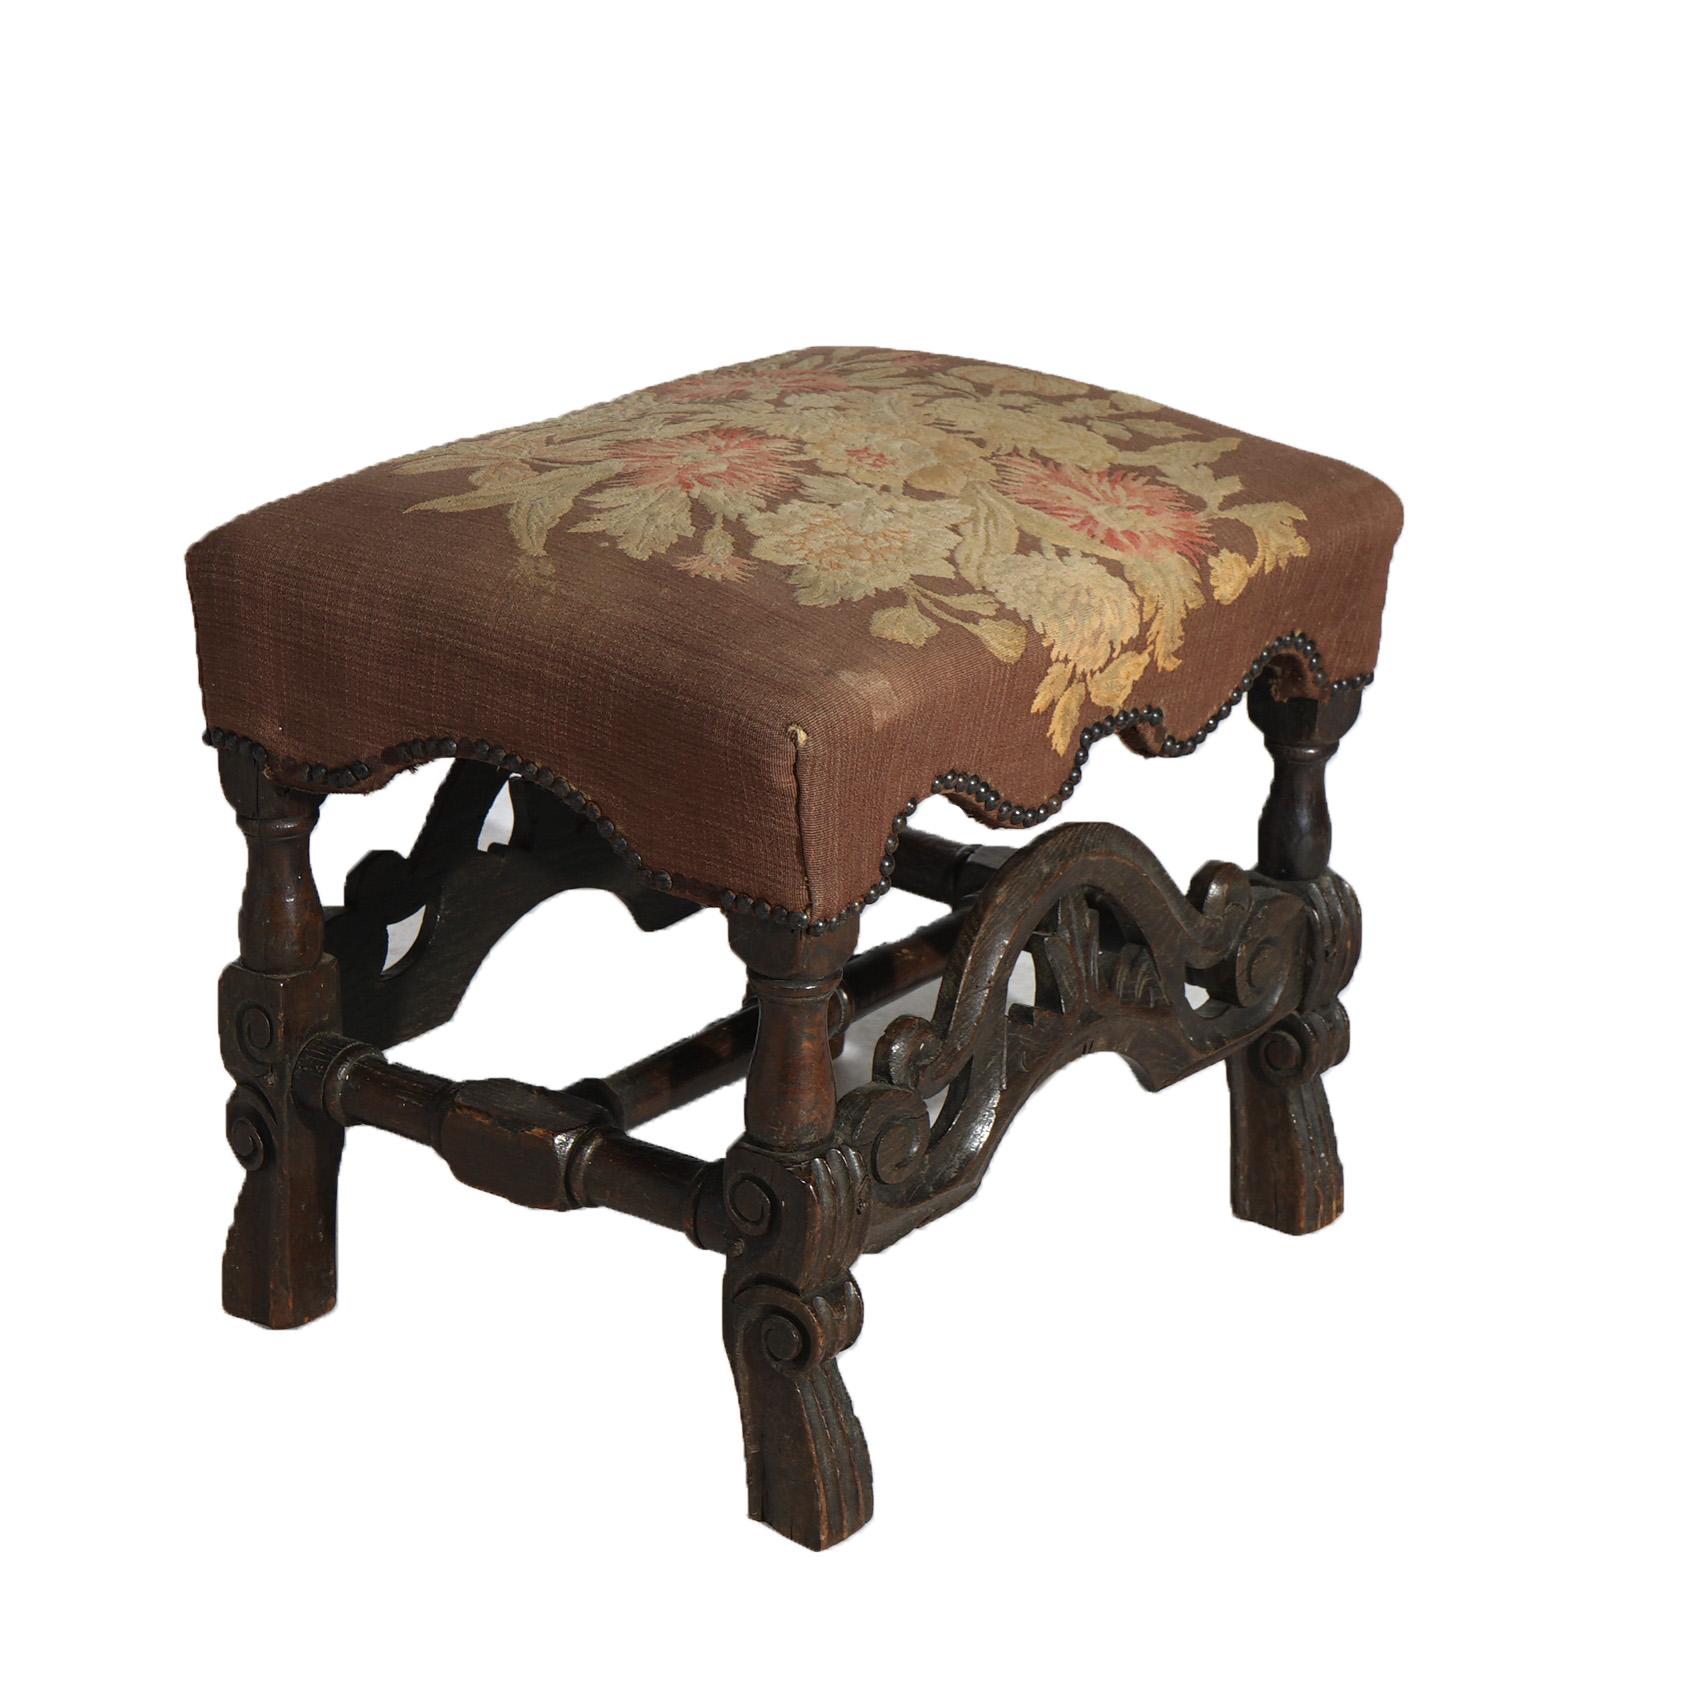 Early Antique English Carved Walnut & Needlepoint Bench (Stool) Circa 1690 For Sale 7